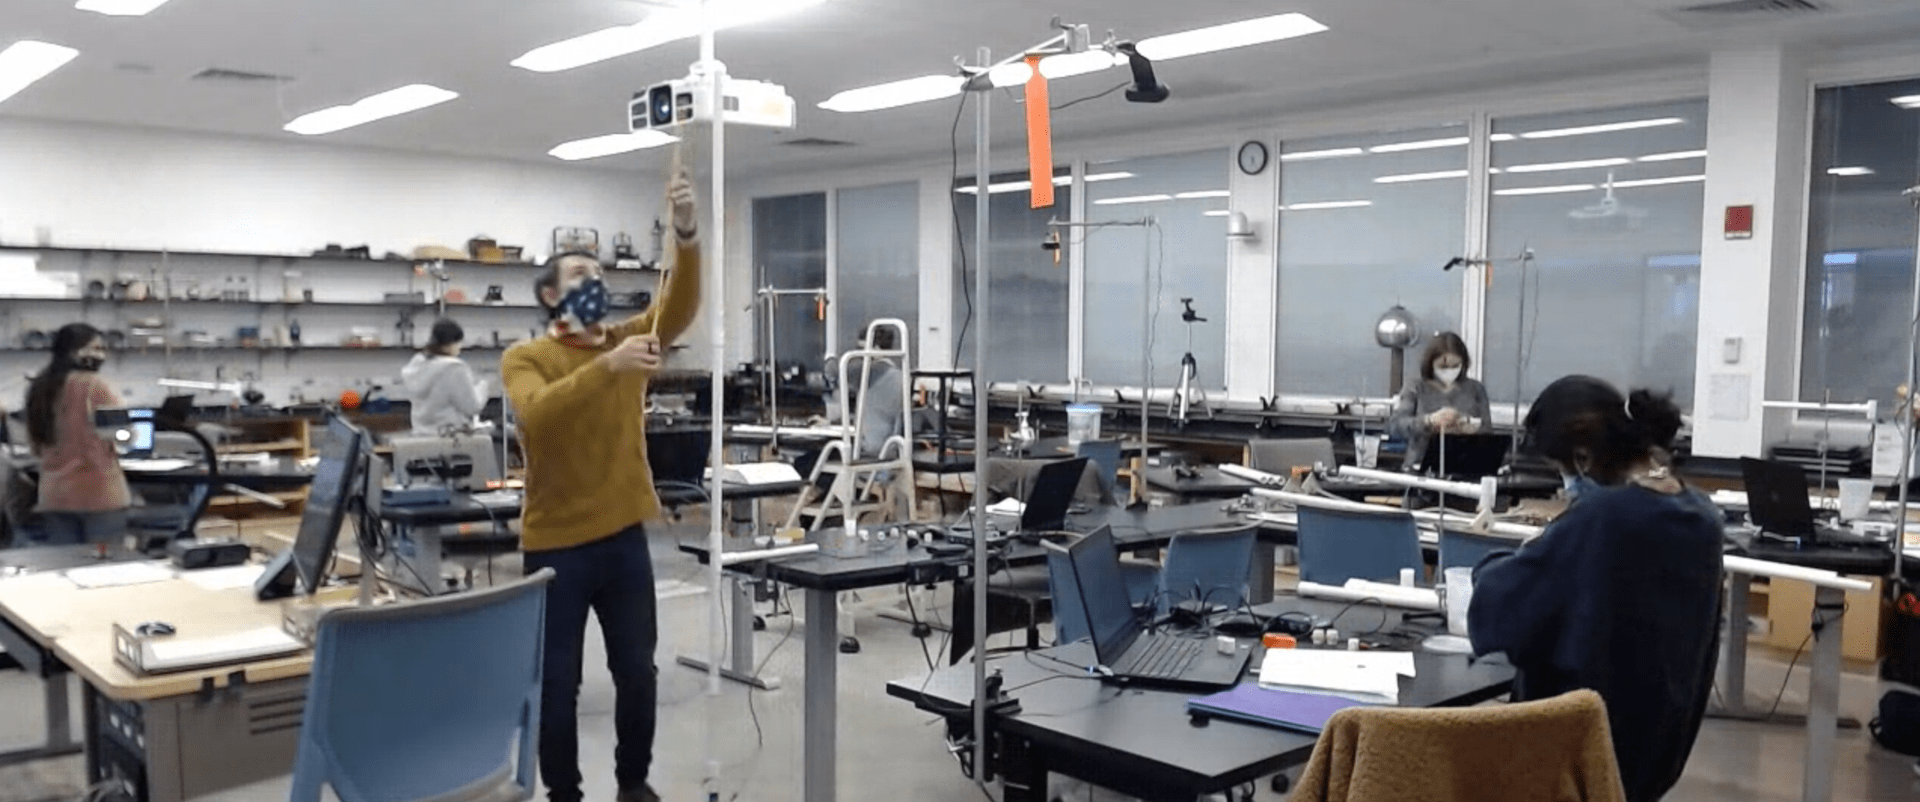 Hybrid Physics Labs with “Astronauts” and “Experts”